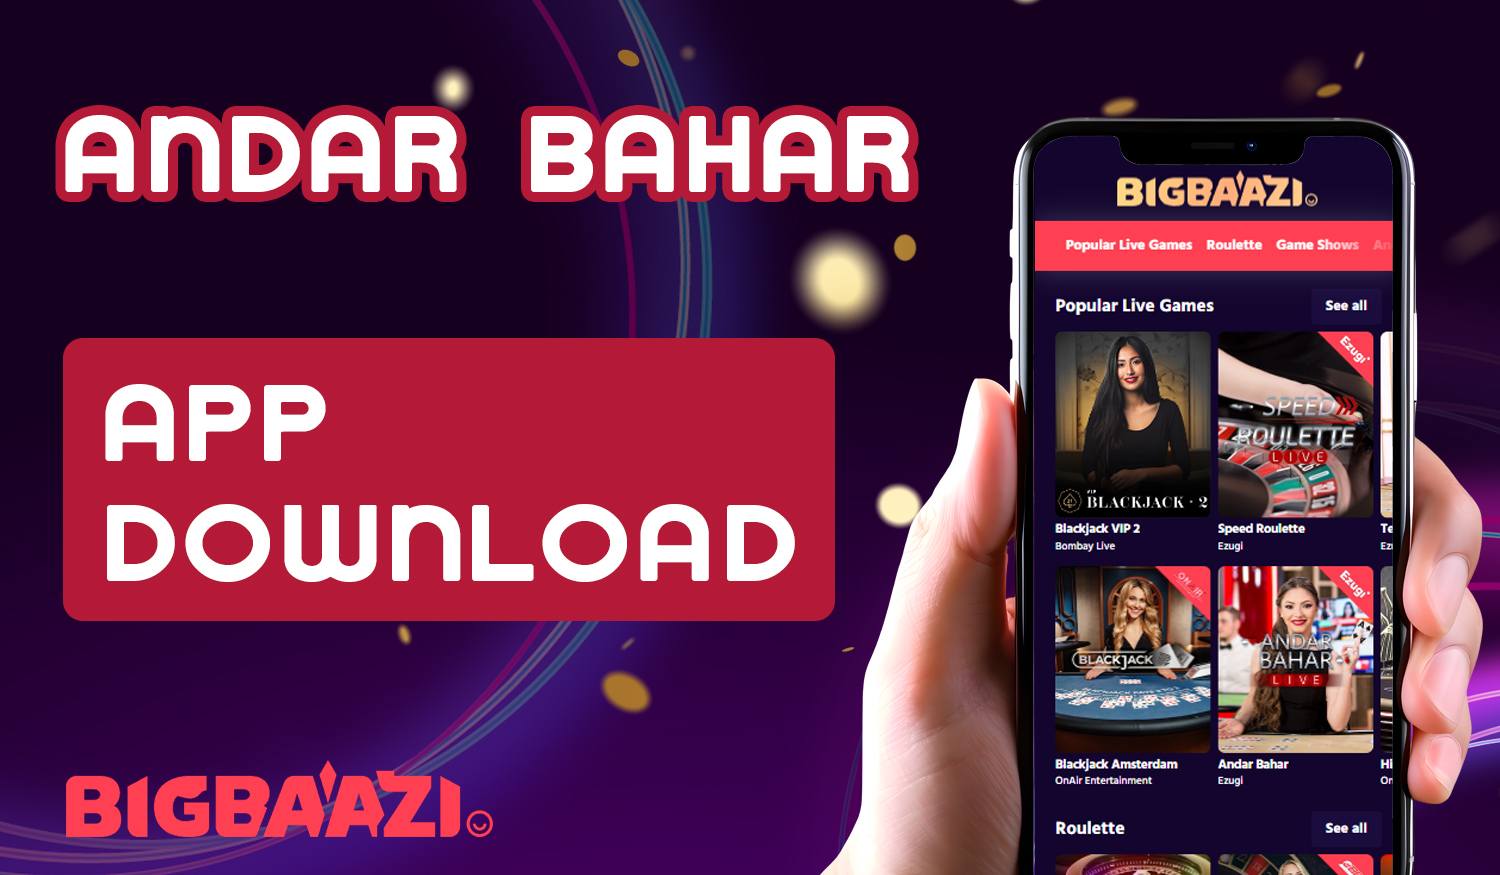 Instructions for Andar Bahar players from India  on how to download and install the Big Baazi mobile app